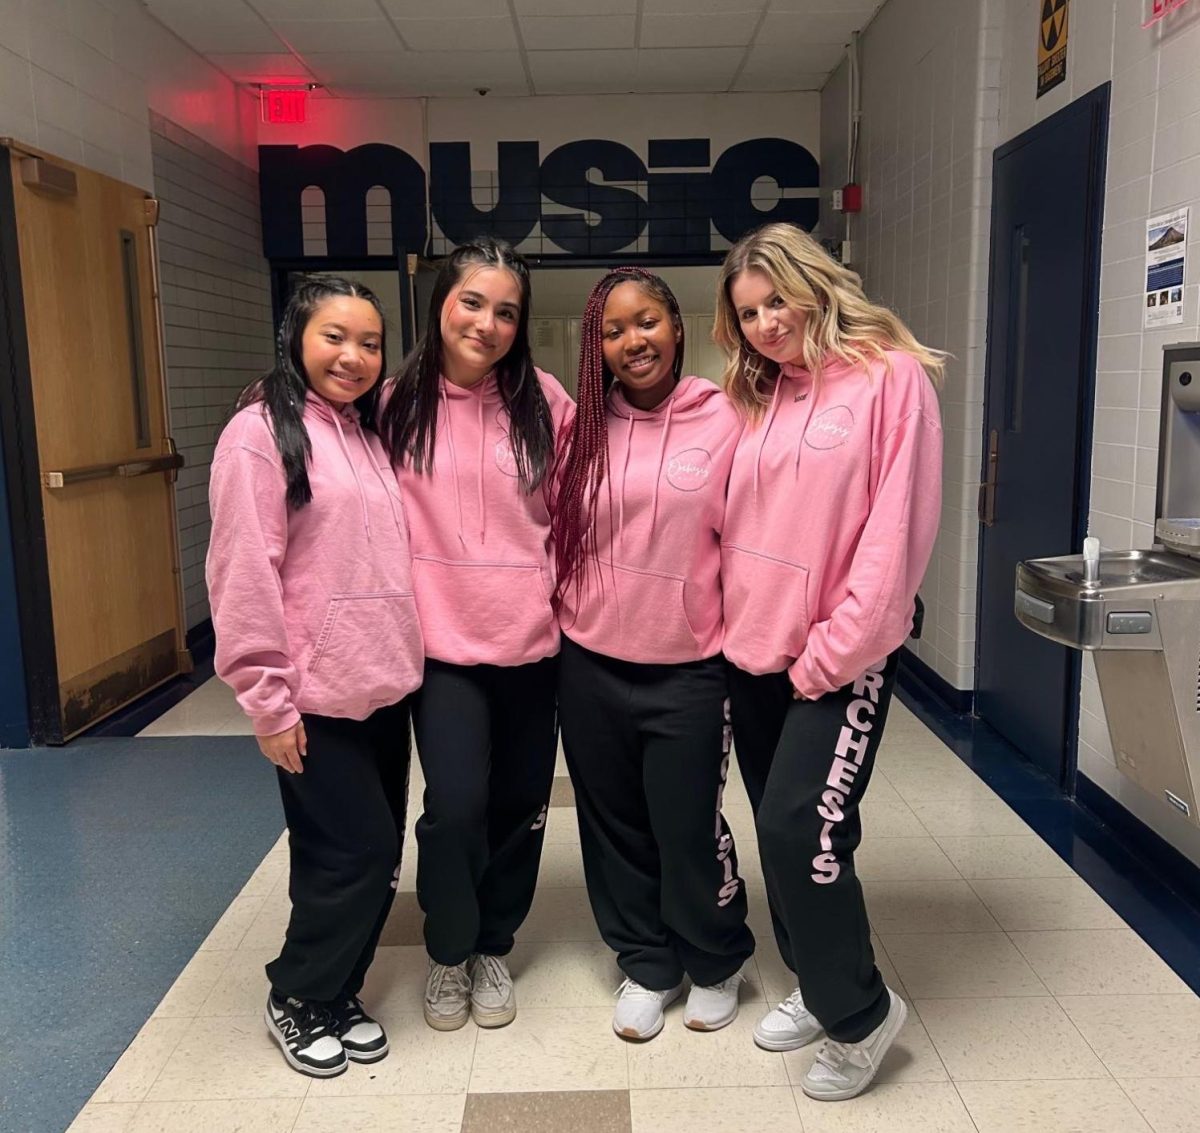 Orchesis officers posing together.